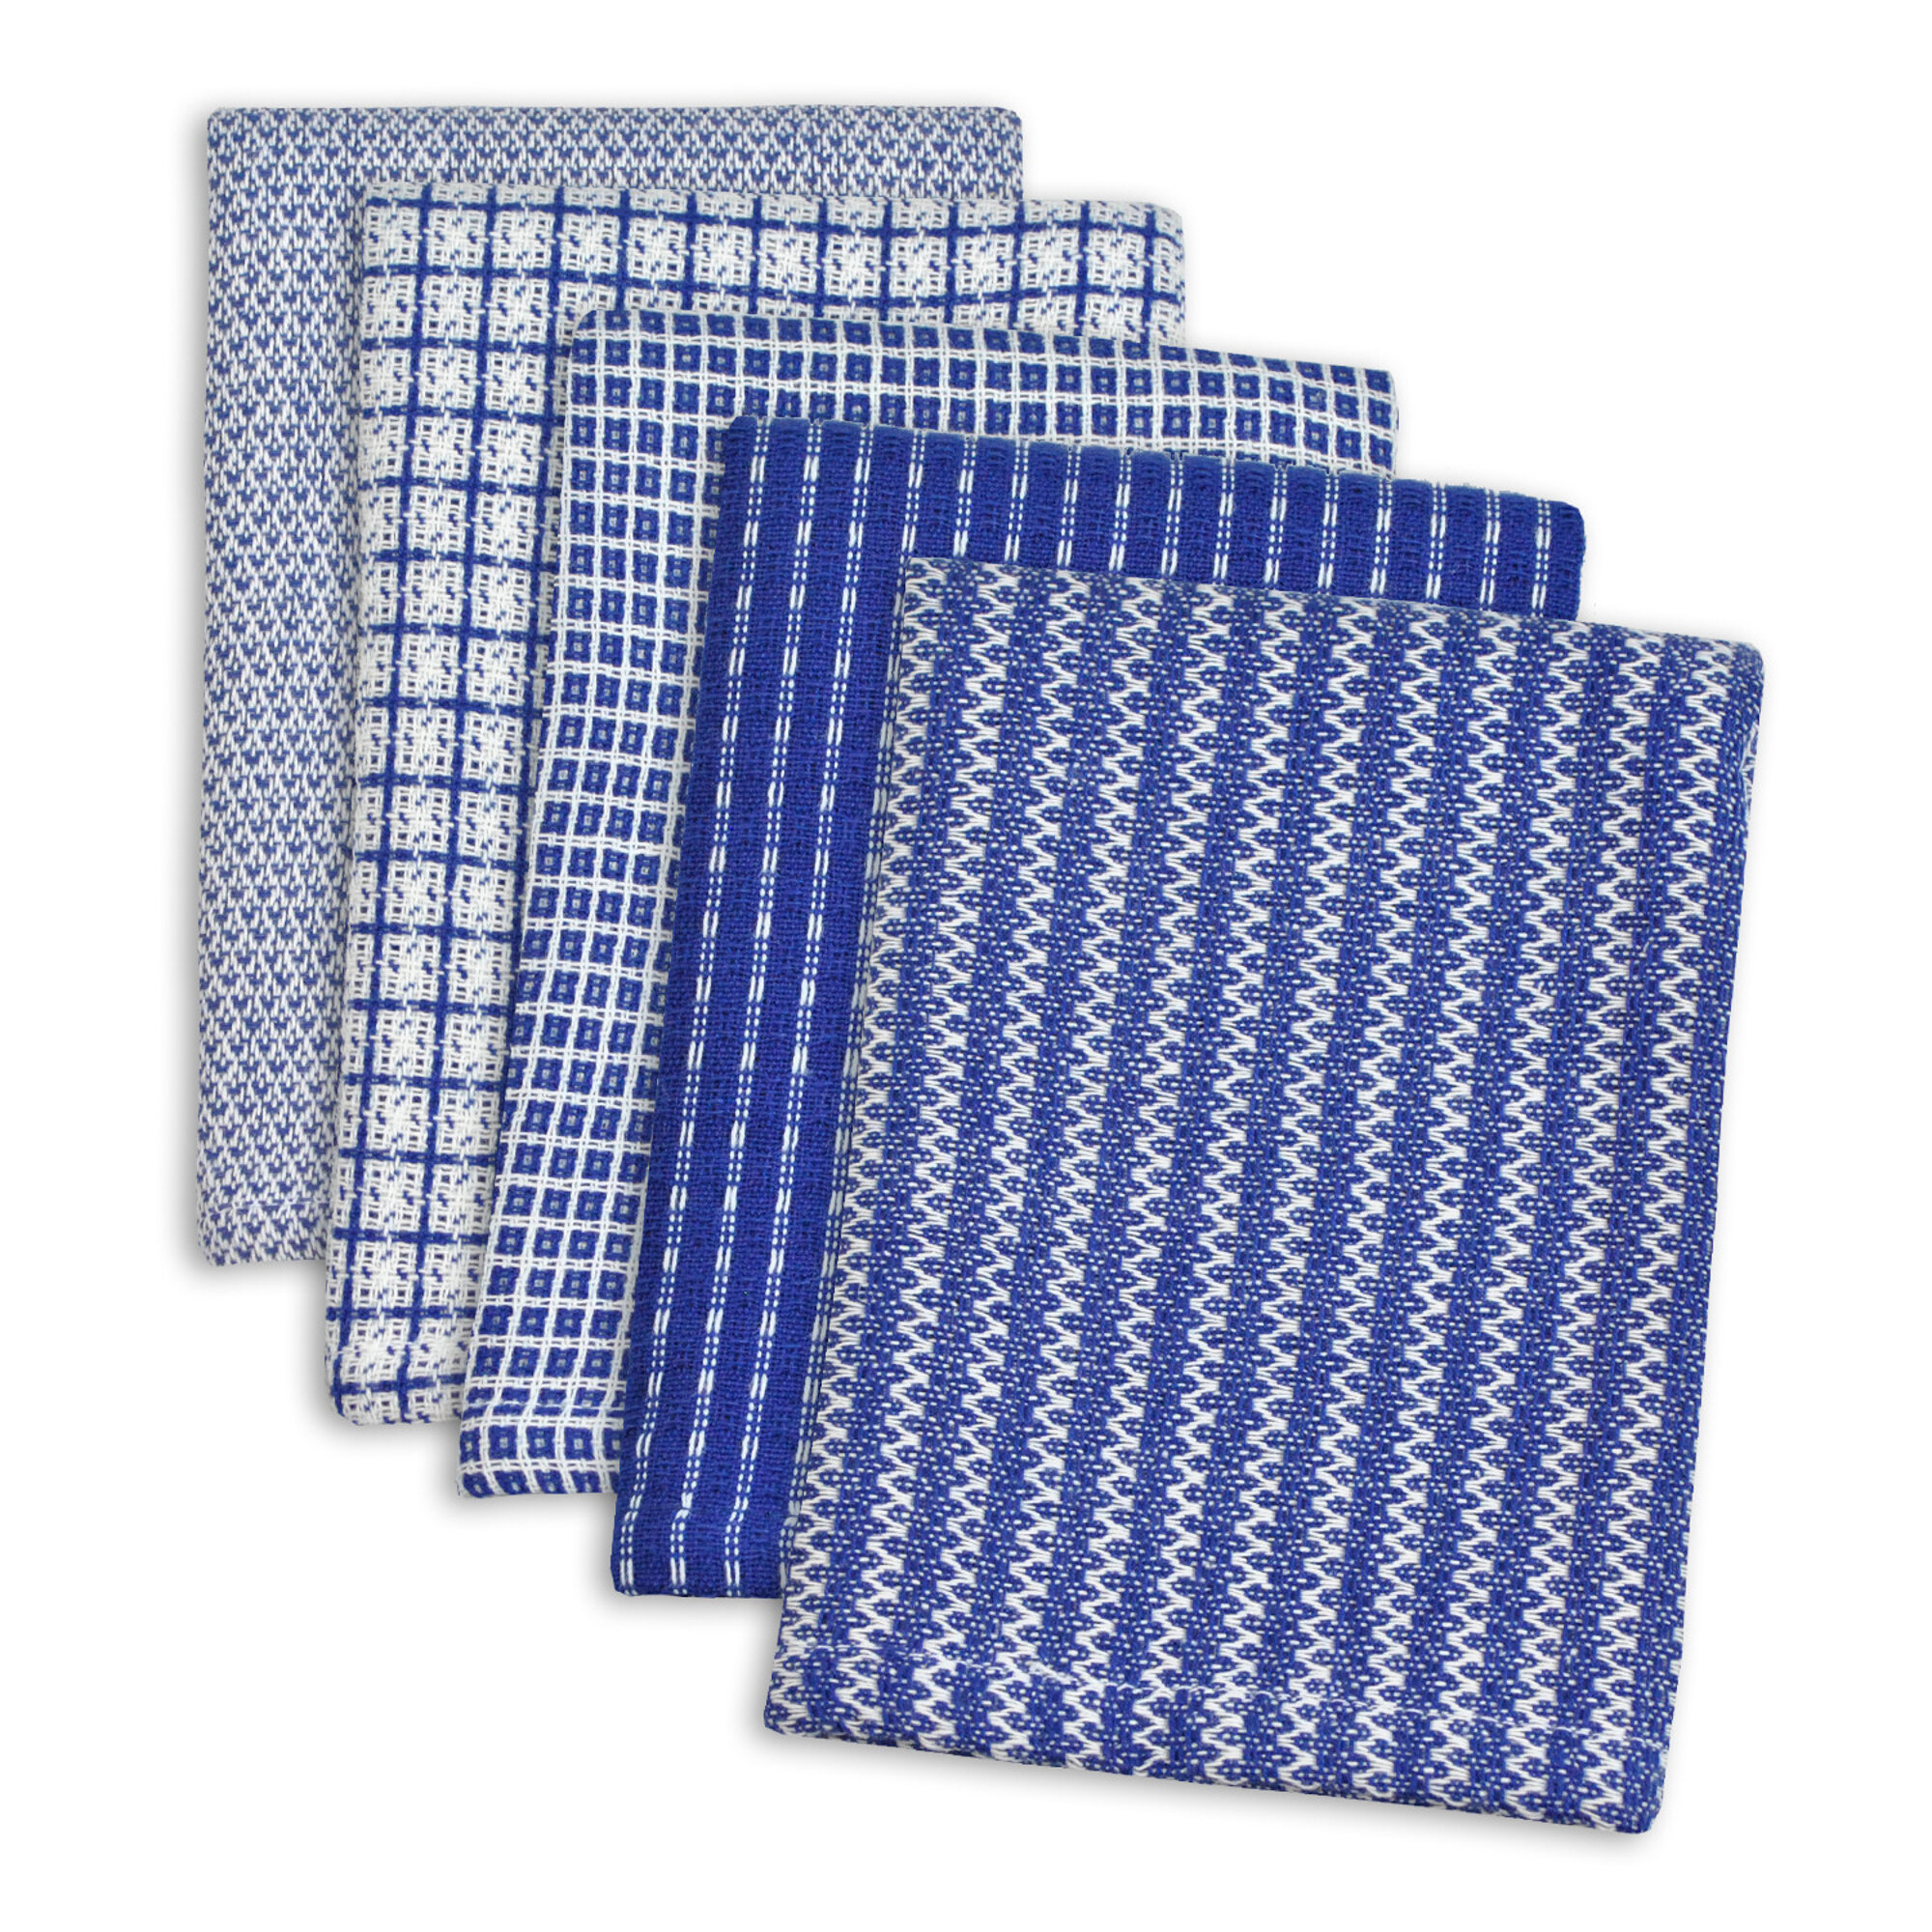 Double Layer Striped Dishcloths 4 Pack USA made